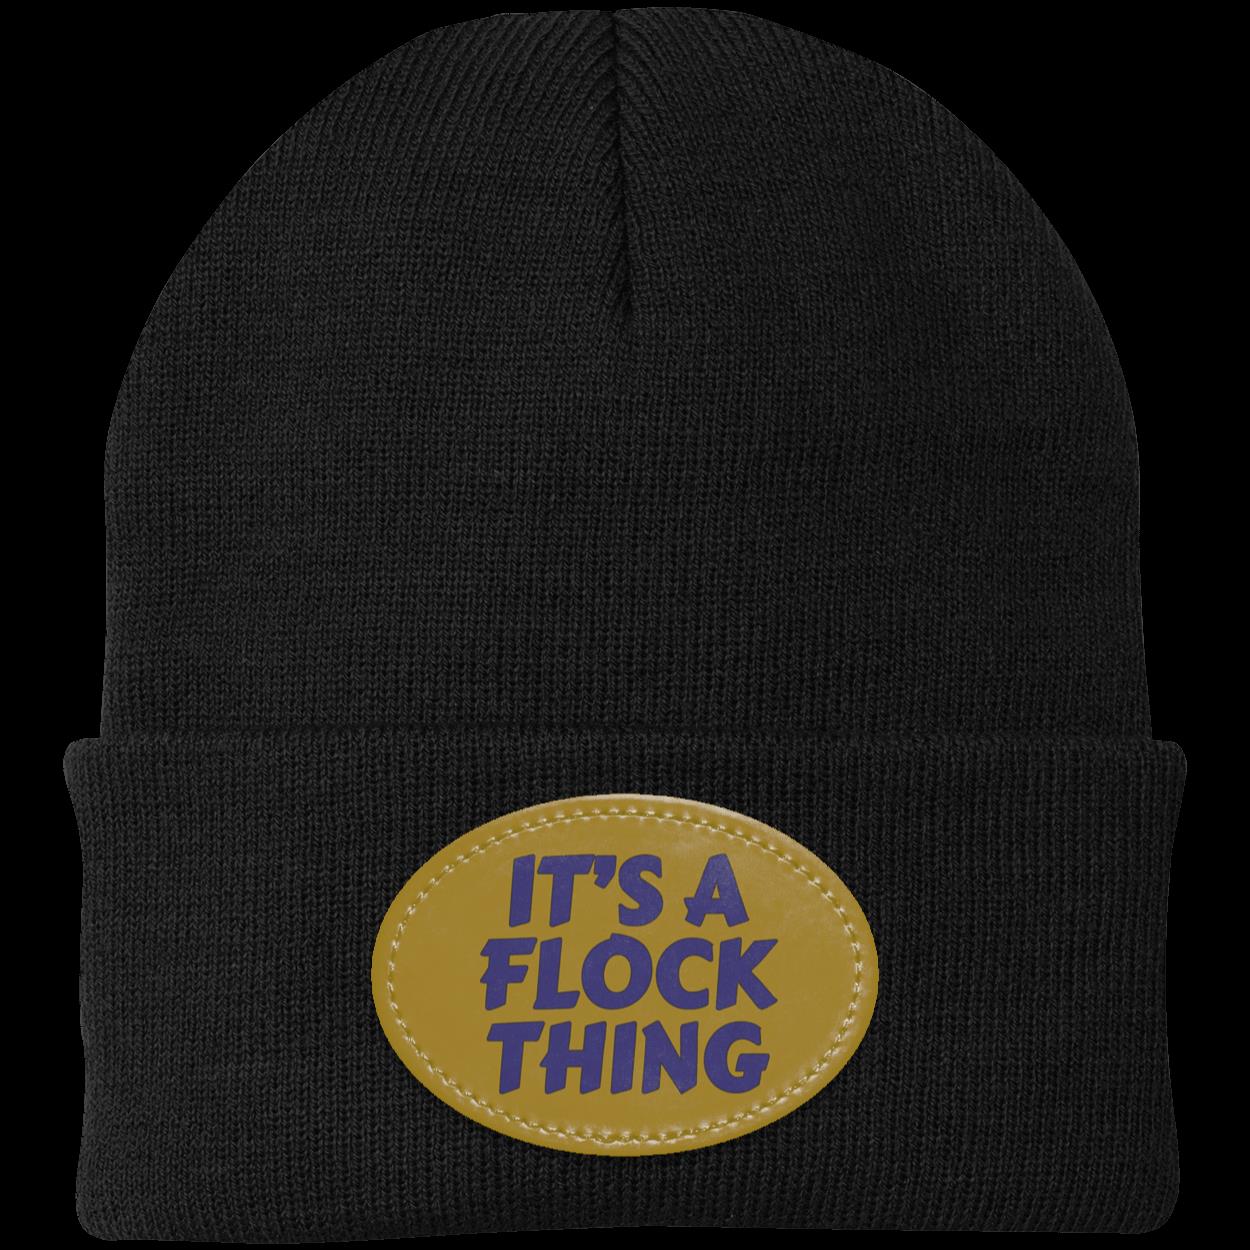 It's a Flock Thing Knit Beanie with Printed Patch | Choice of Purple, Orange or Black Winter Hat